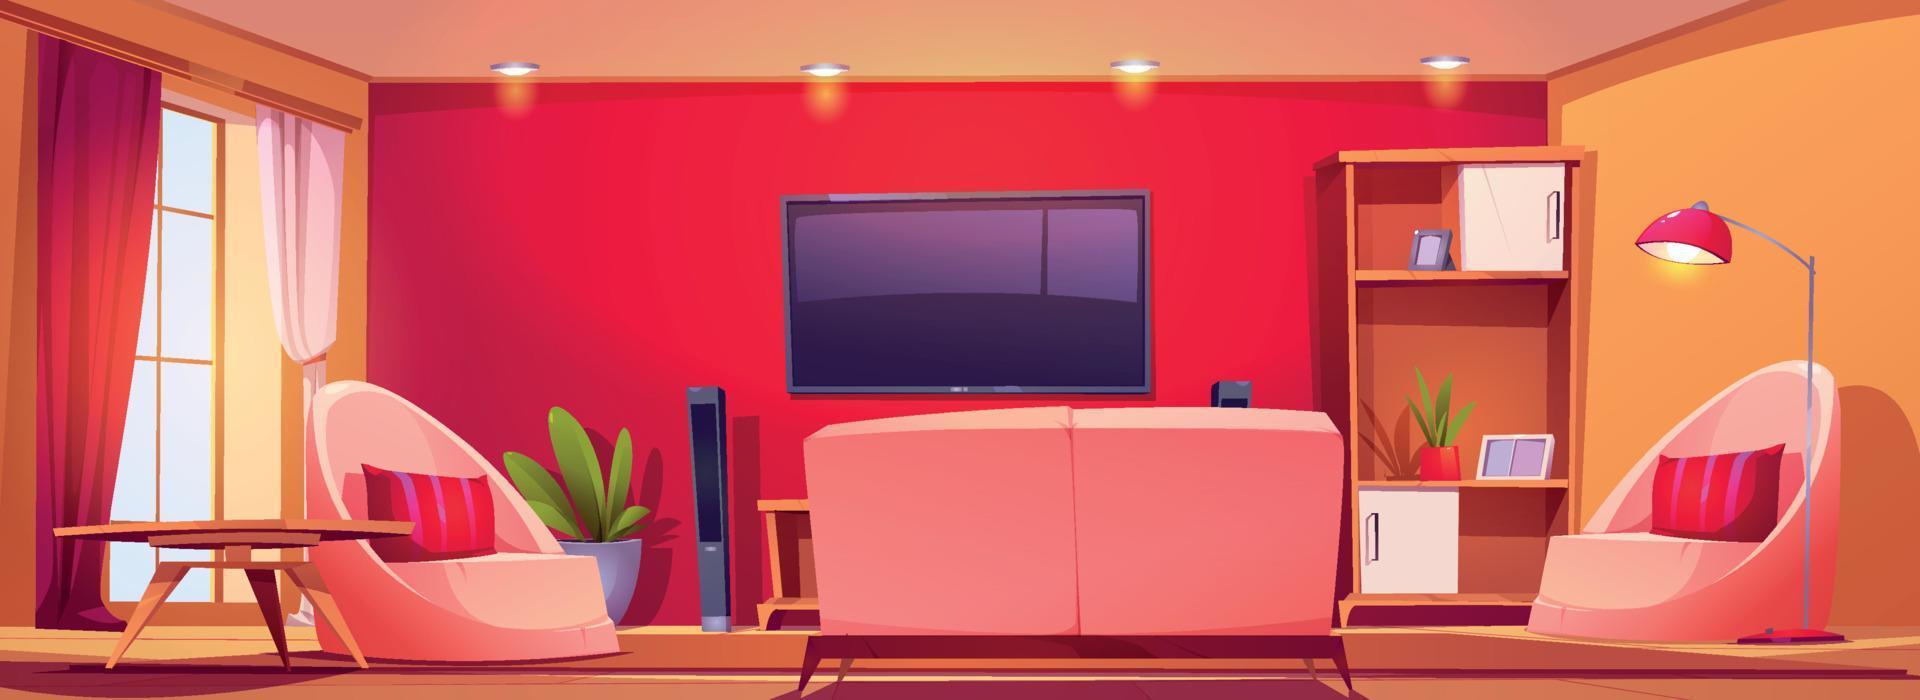 Living room interior with red wall, tv and couch vector